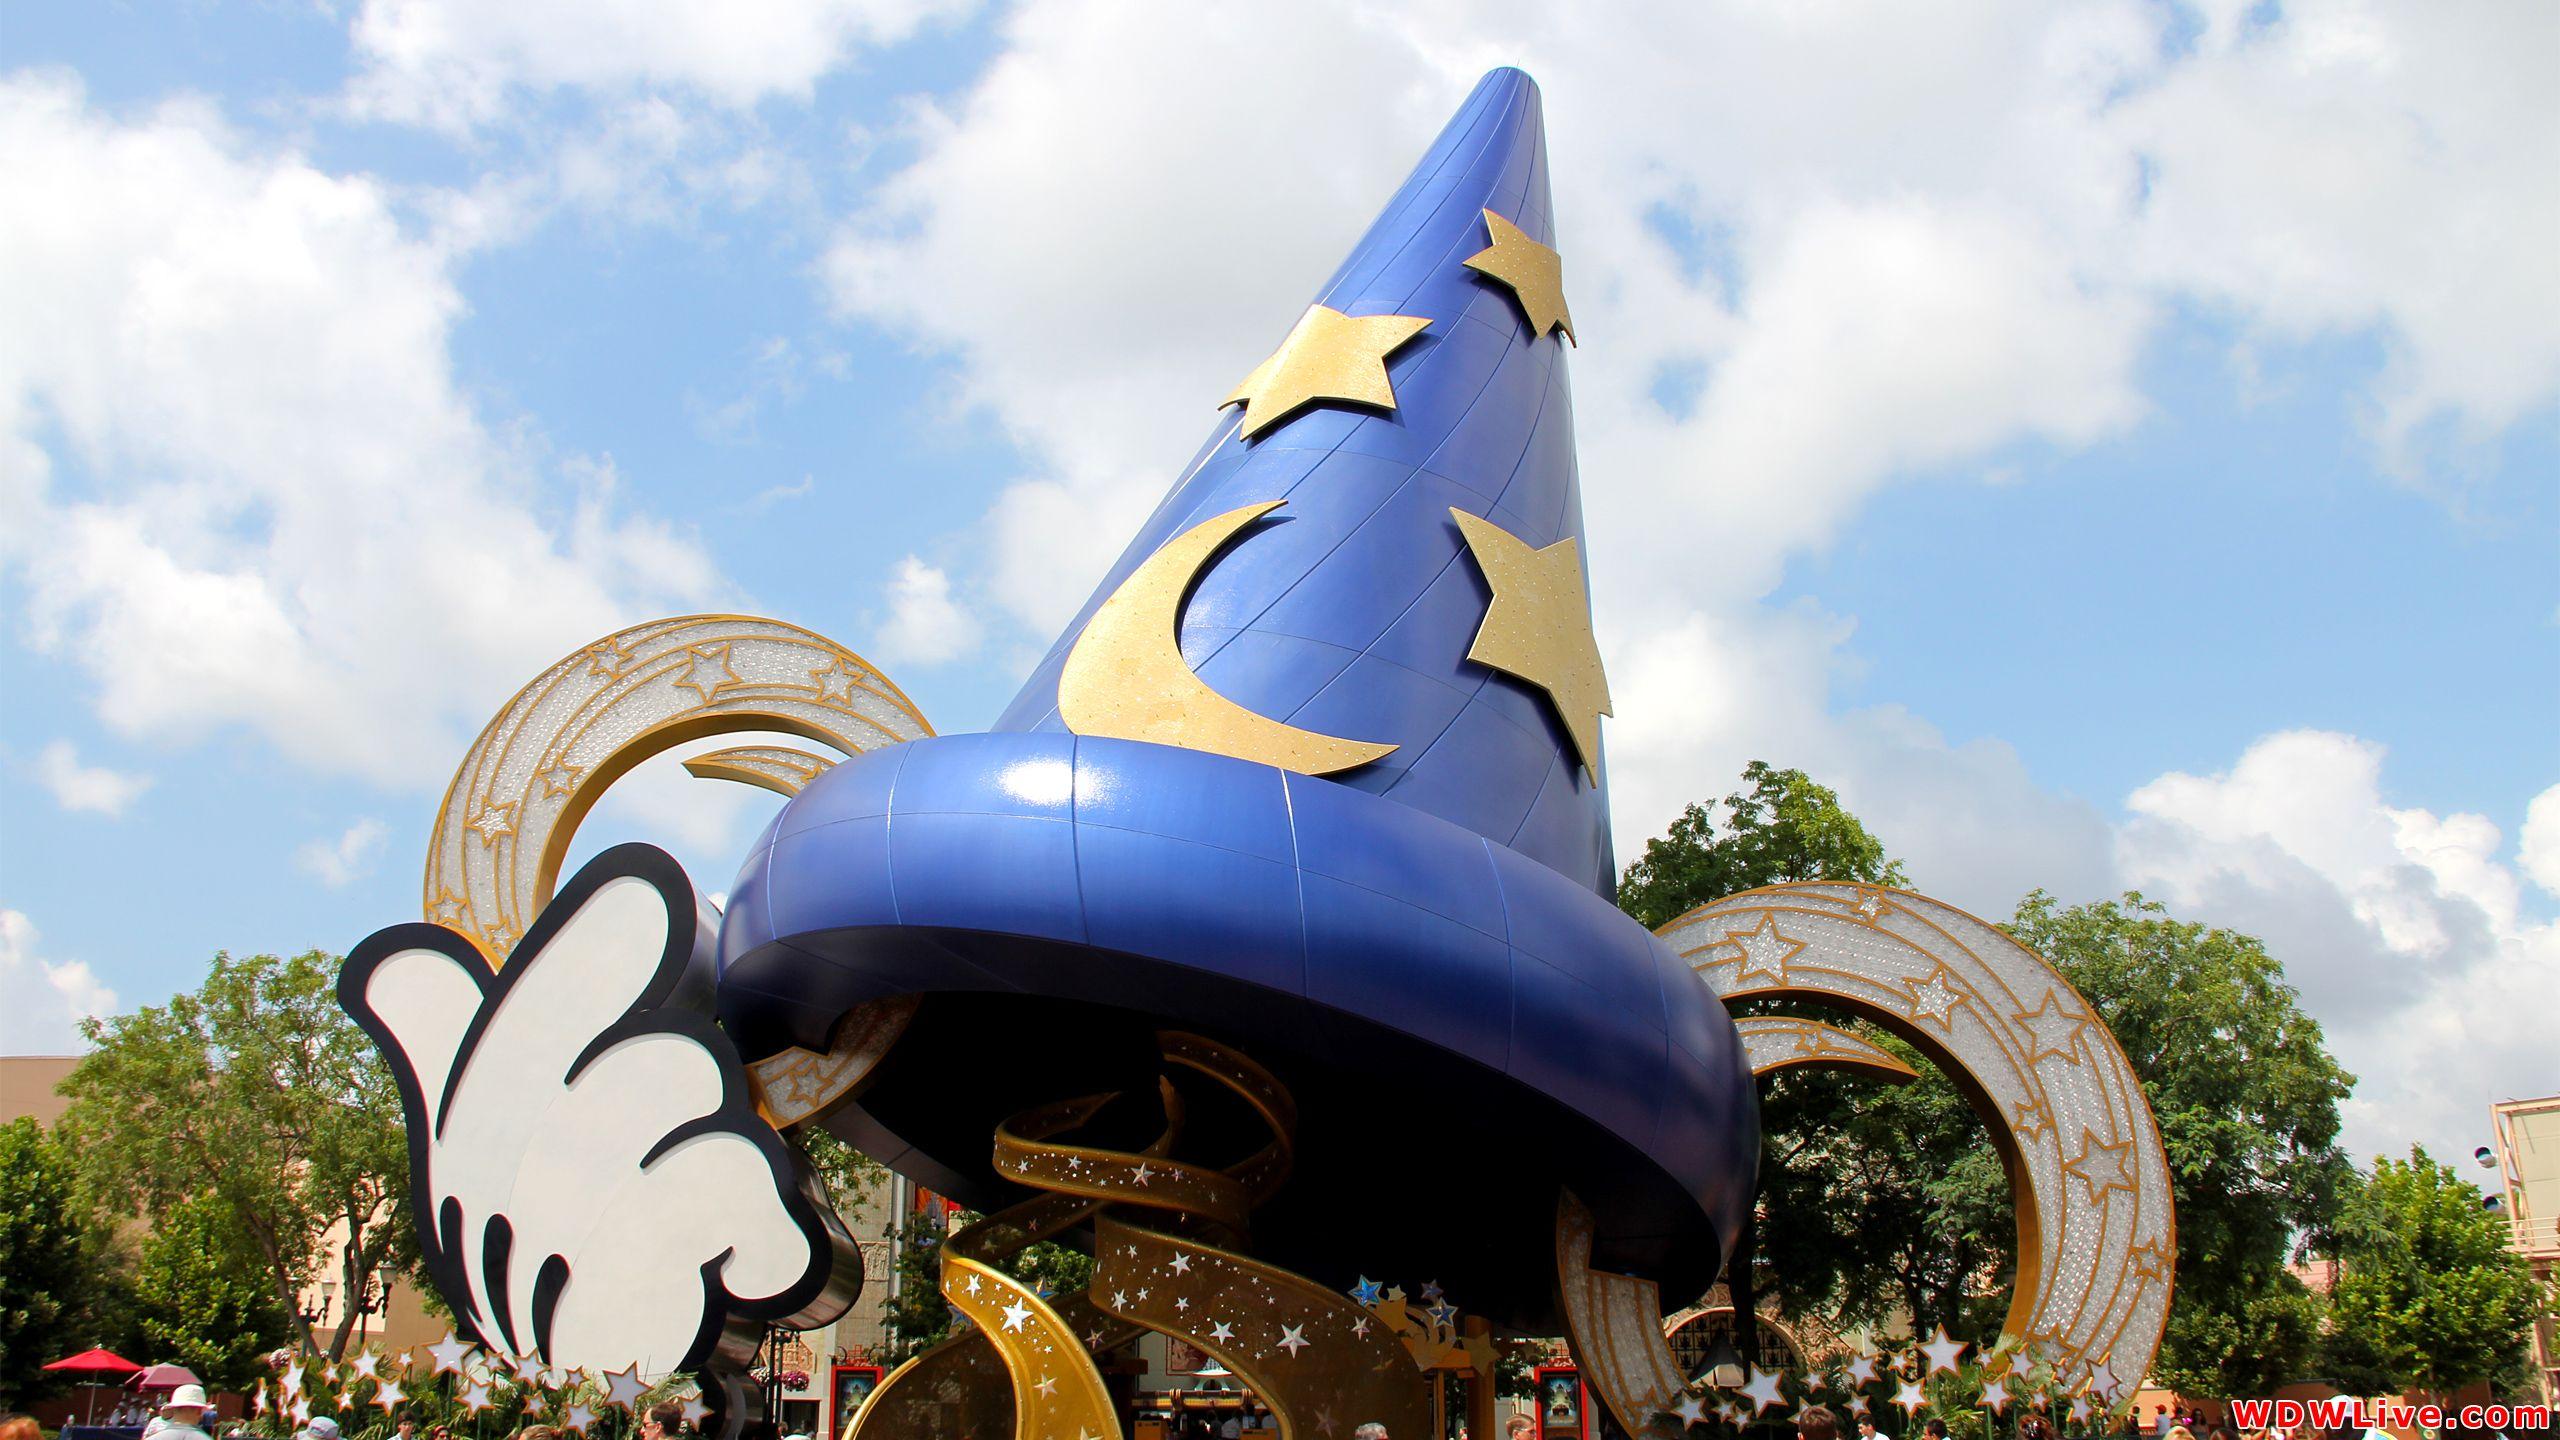 The Sorcerer's Hat: The 122 Foot Tall Icon Of Disney's Hollywood